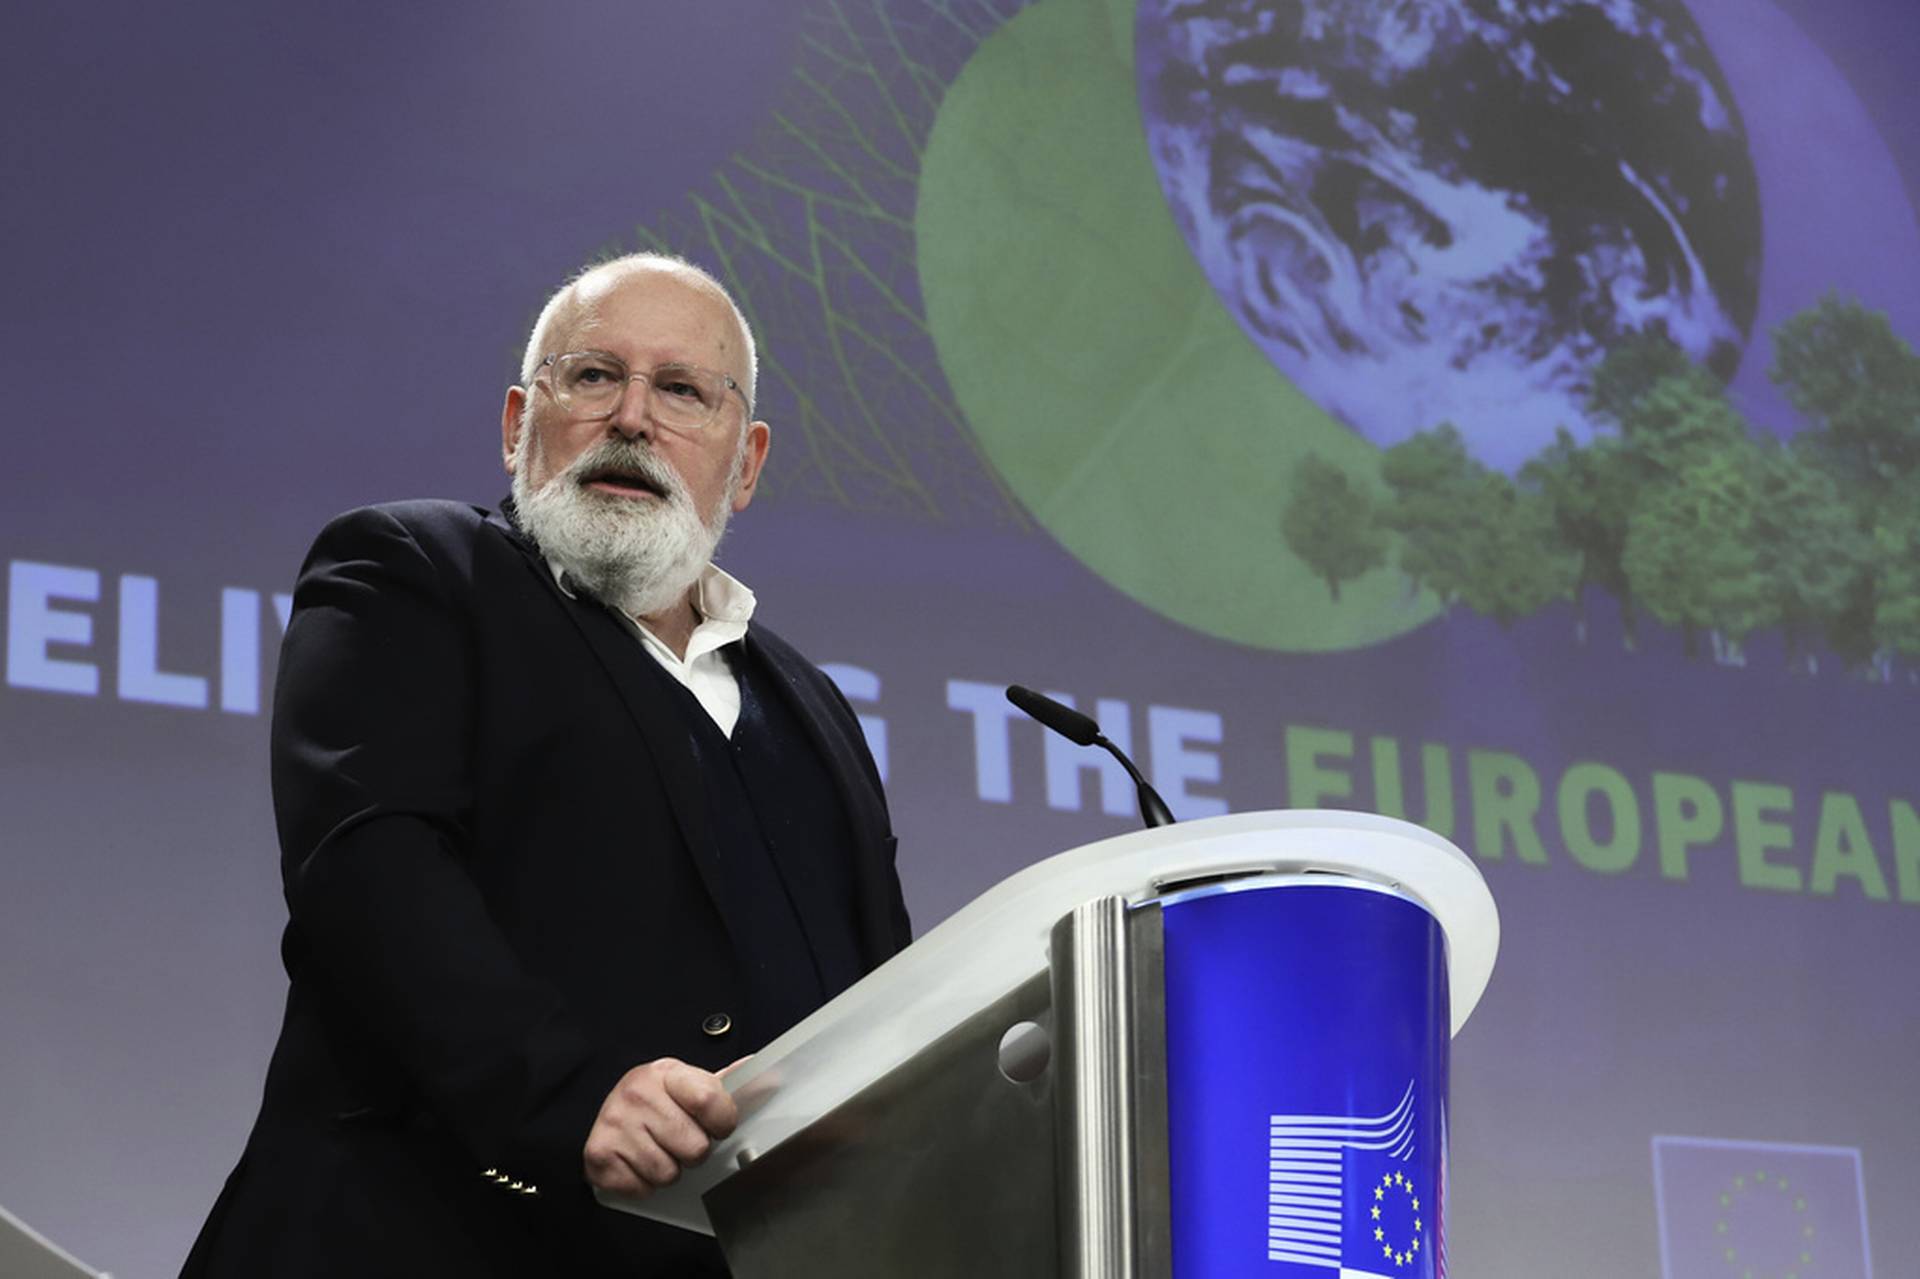 Uncertain struggle for the climate when the EU will be “fit for 55”